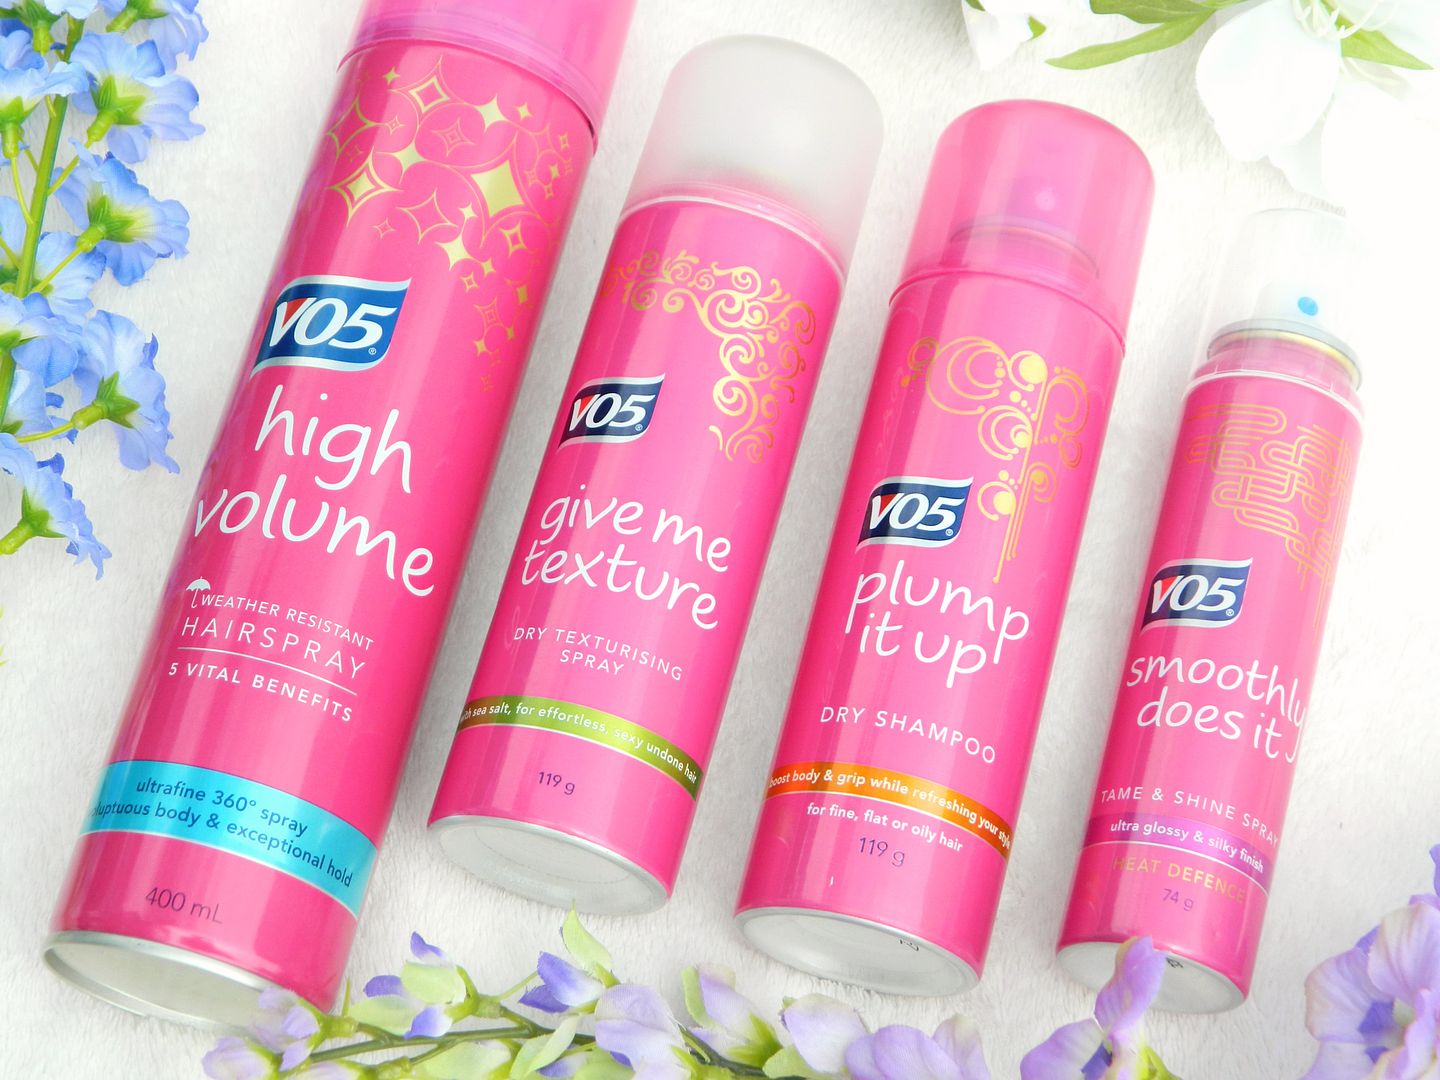 VO5 Hair Care Review Packaging Belle-amie UK Beauty Fashion Lifestyle Blog